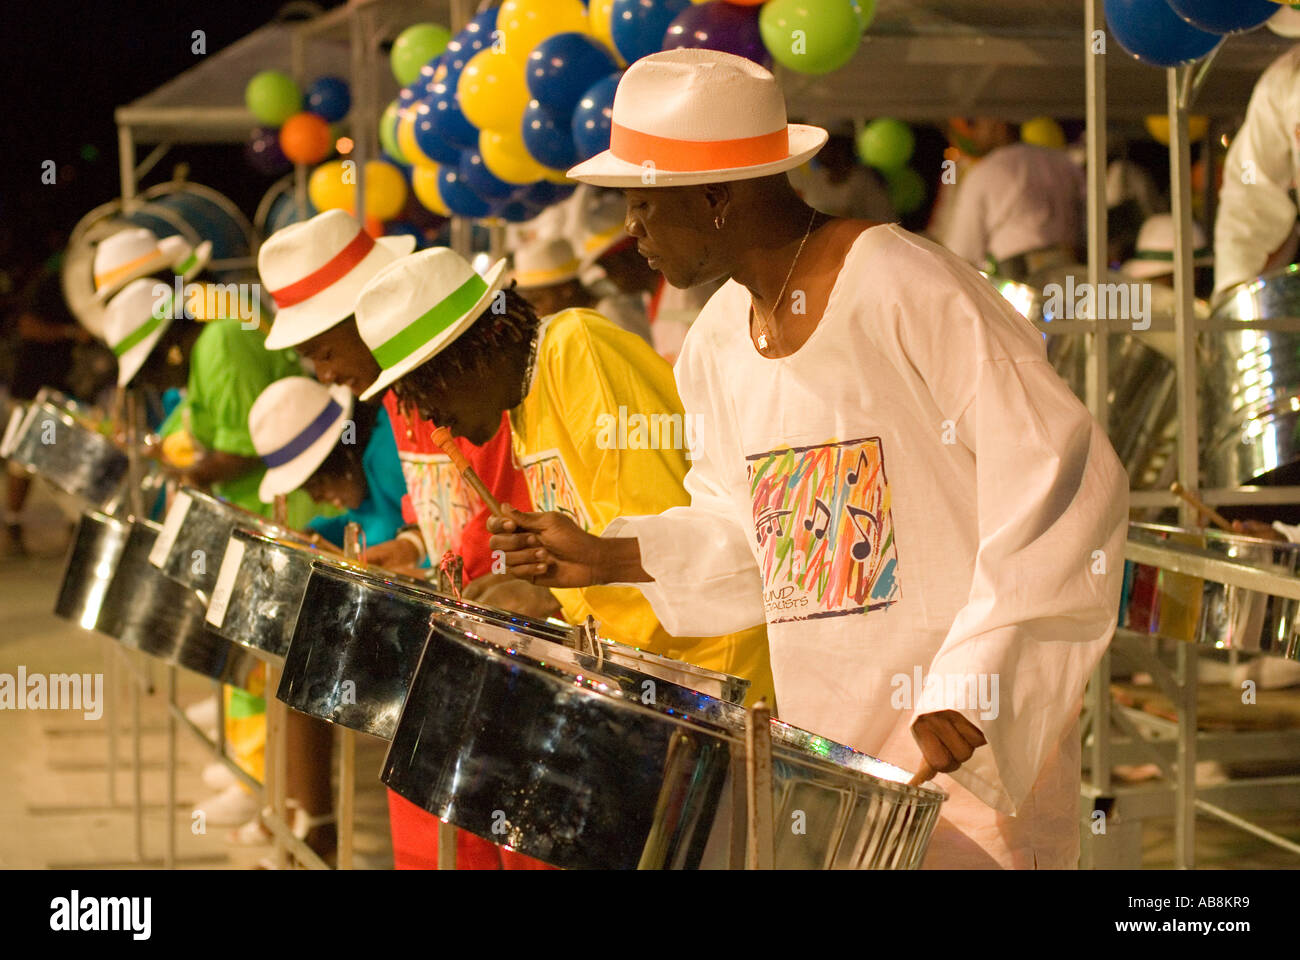 West Indies Trinidad Carnival Port of Spain Dimanche Gras Competion Steel Pan Band performing on main stage Queens Park Stock Photo